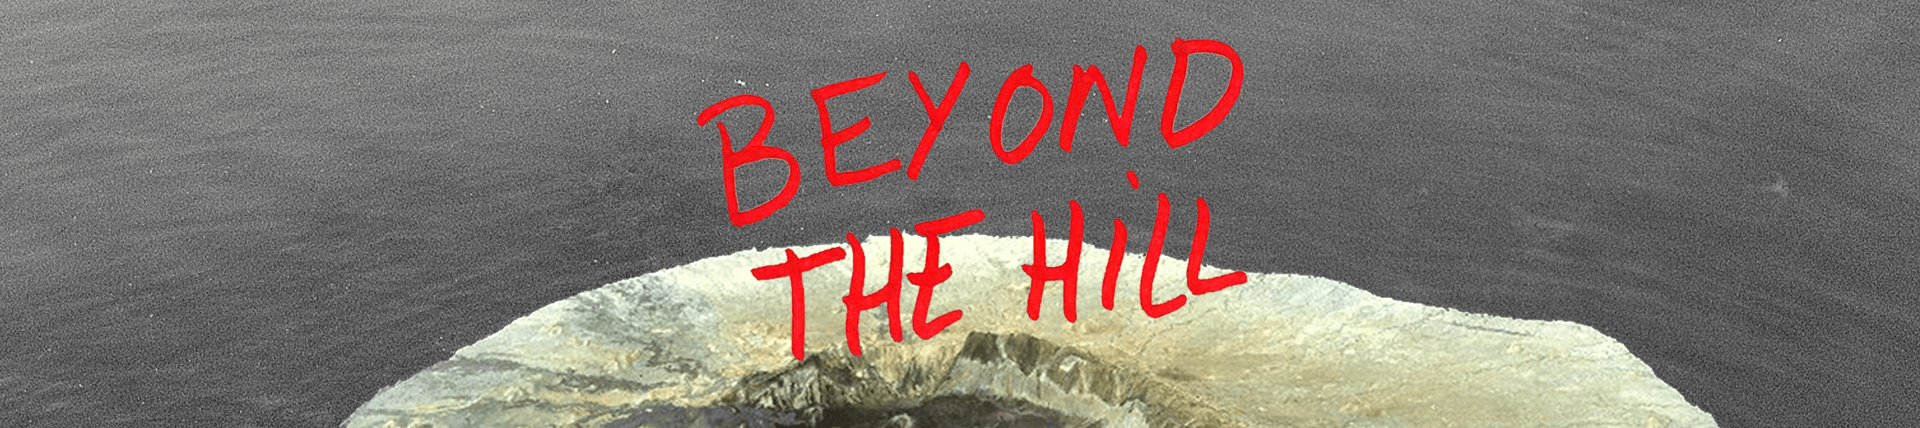 Beyond the Hill banner